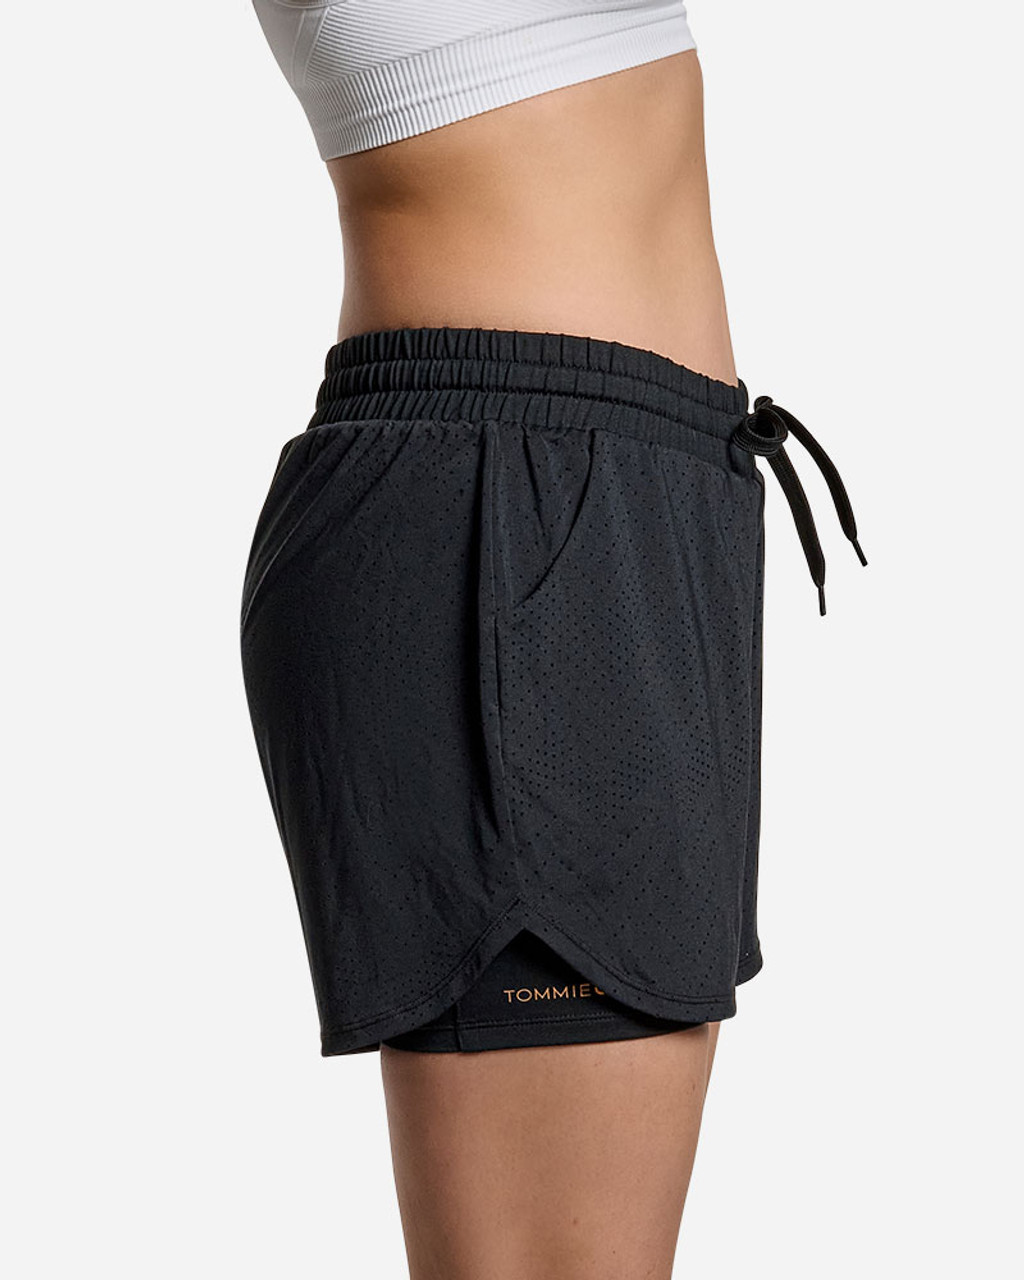 Compression shorts for women